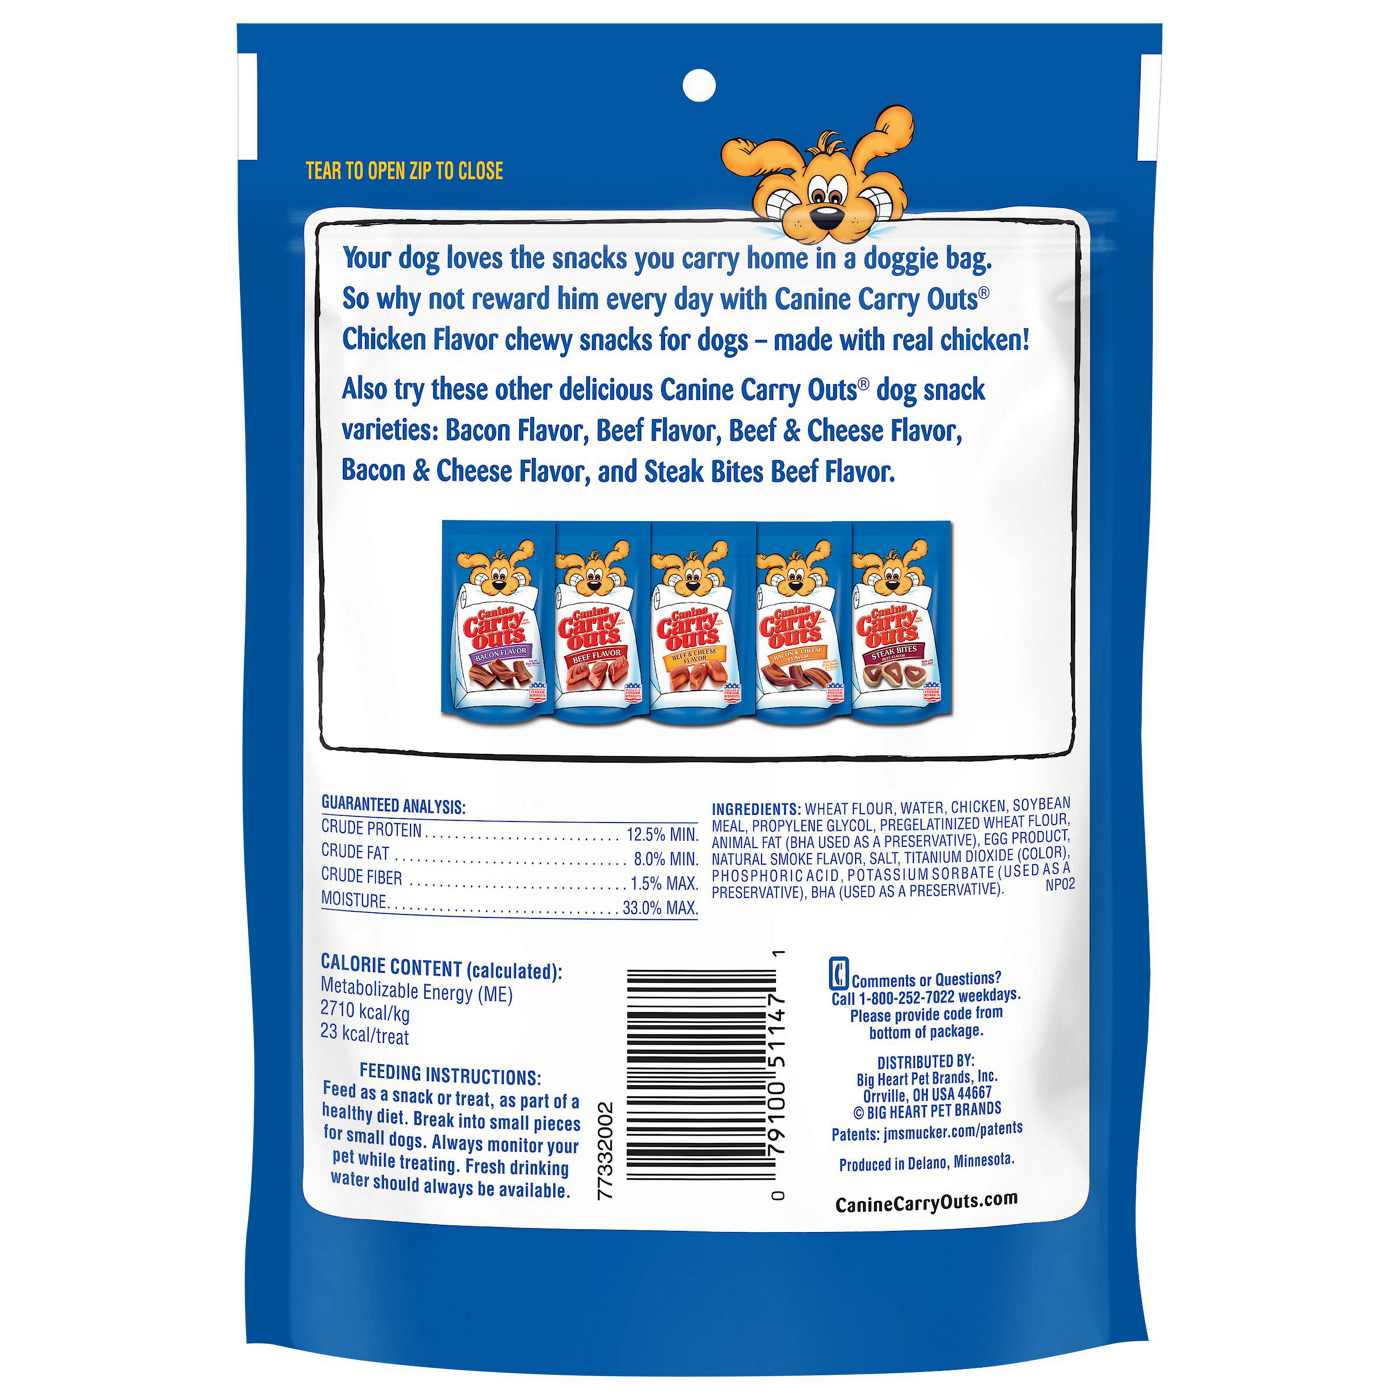 Canine Carry Outs Chicken Flavor Strips Dog Treats; image 3 of 3